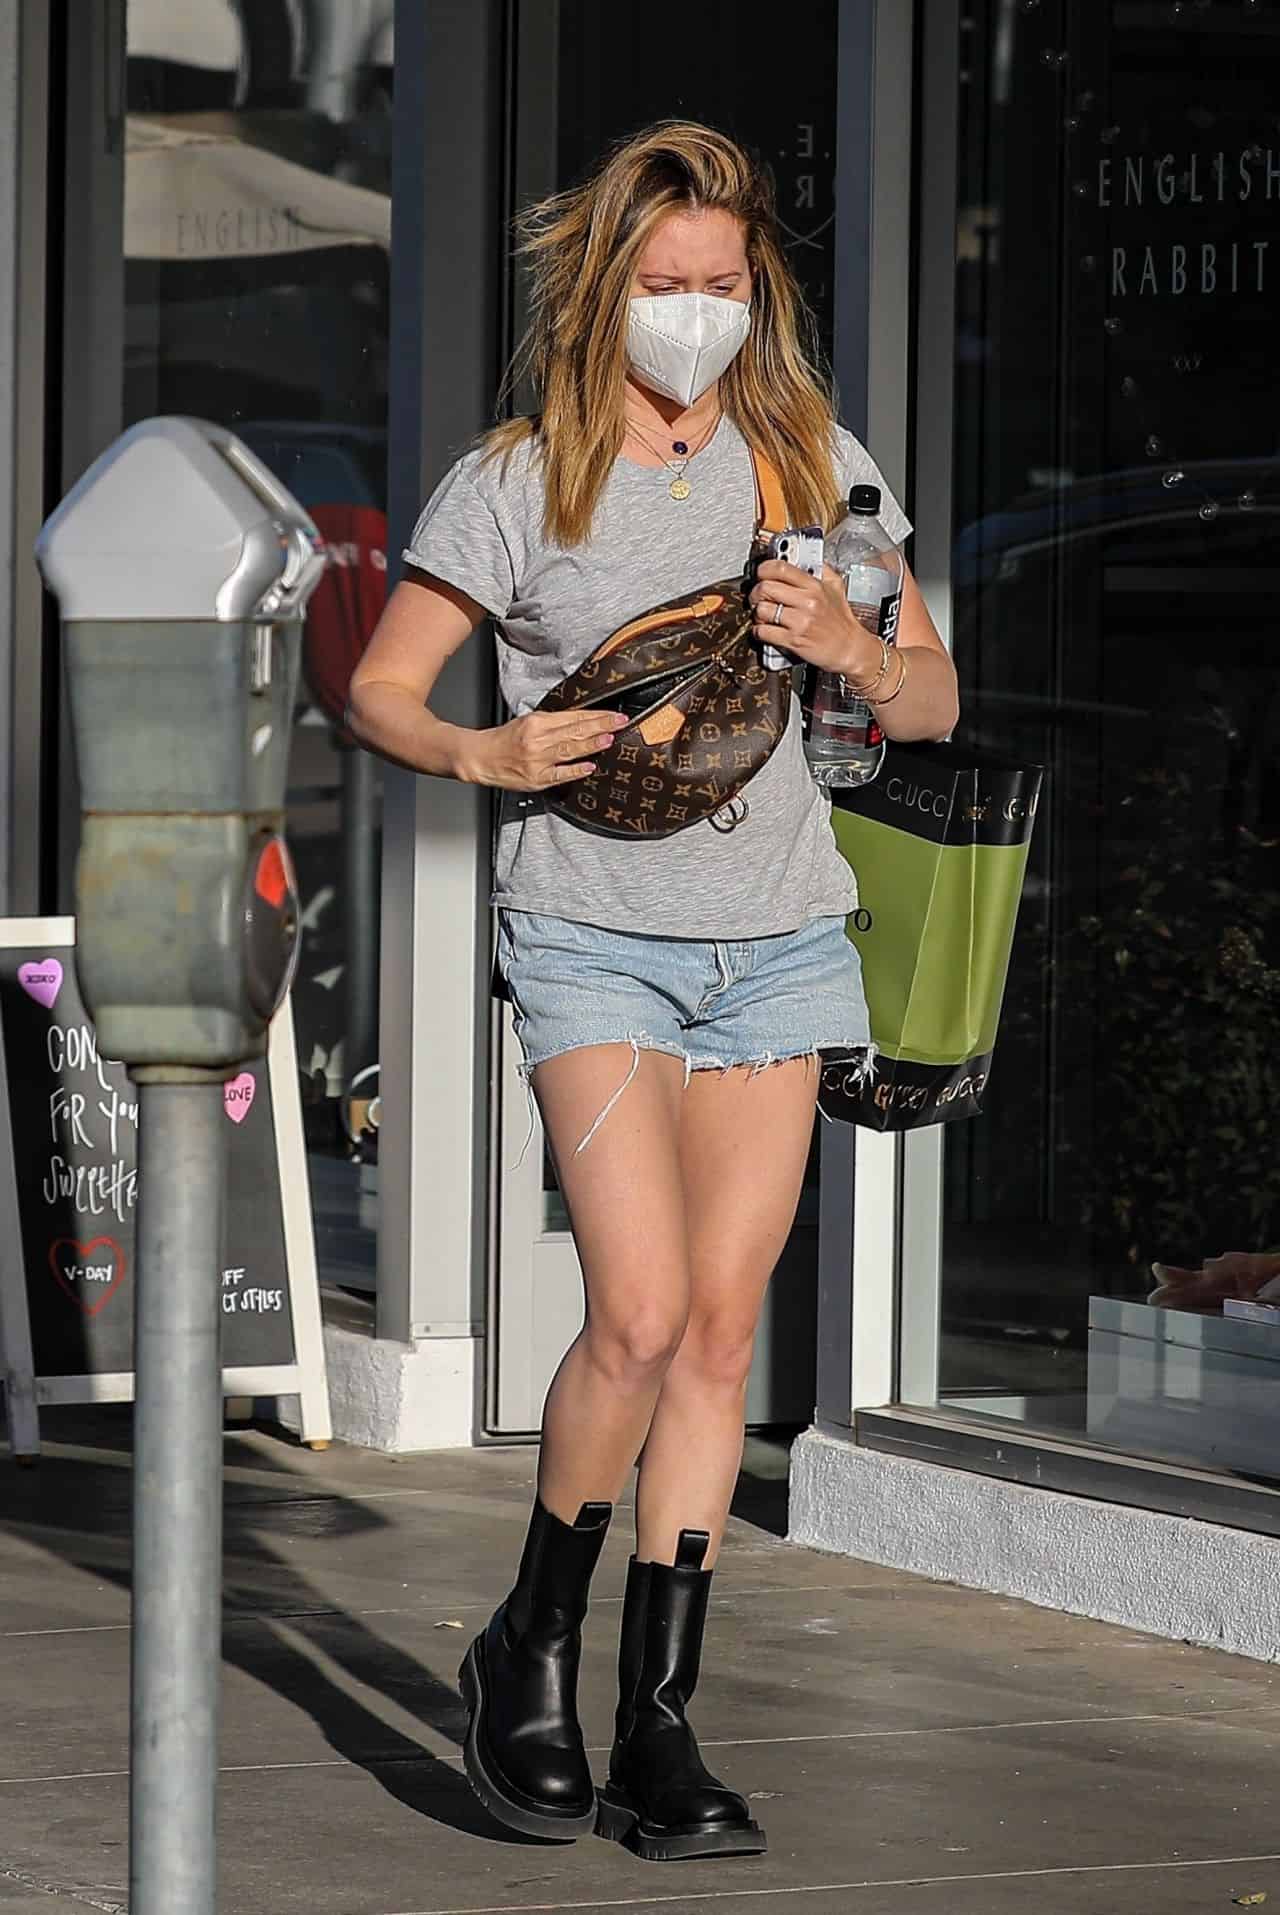 Ashley Tisdale Reveals Her Killer Legs in Denim Shorts on a Shopping Trip